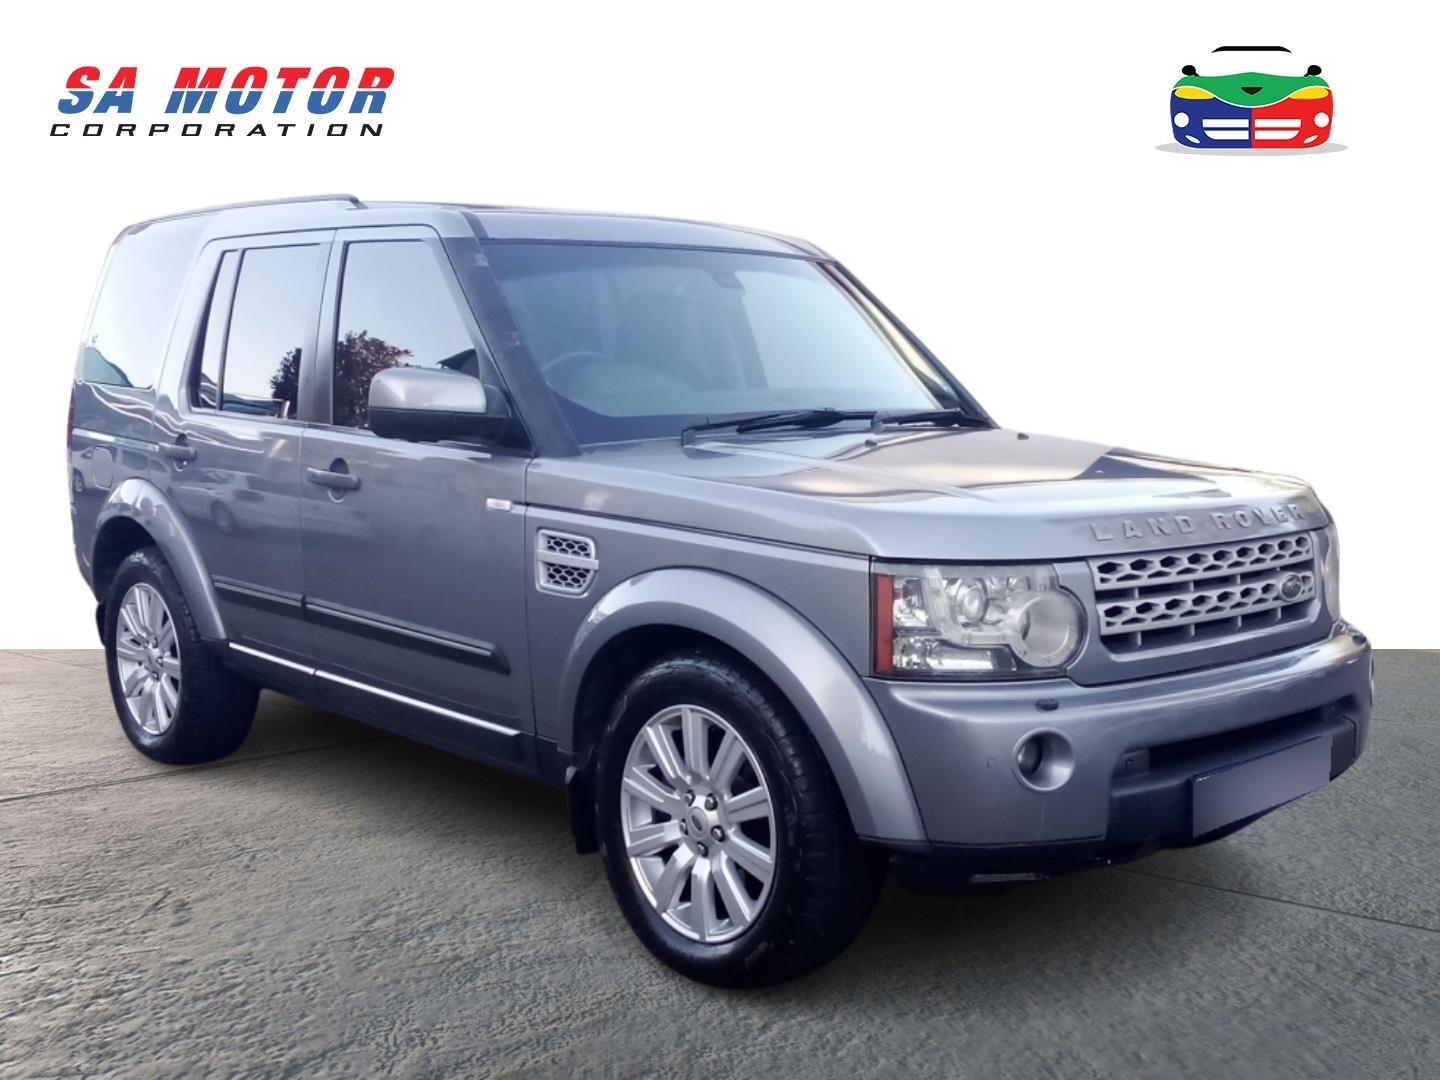 2011 Land Rover Discovery 4 3.0 D V6 Hse for sale - 329008